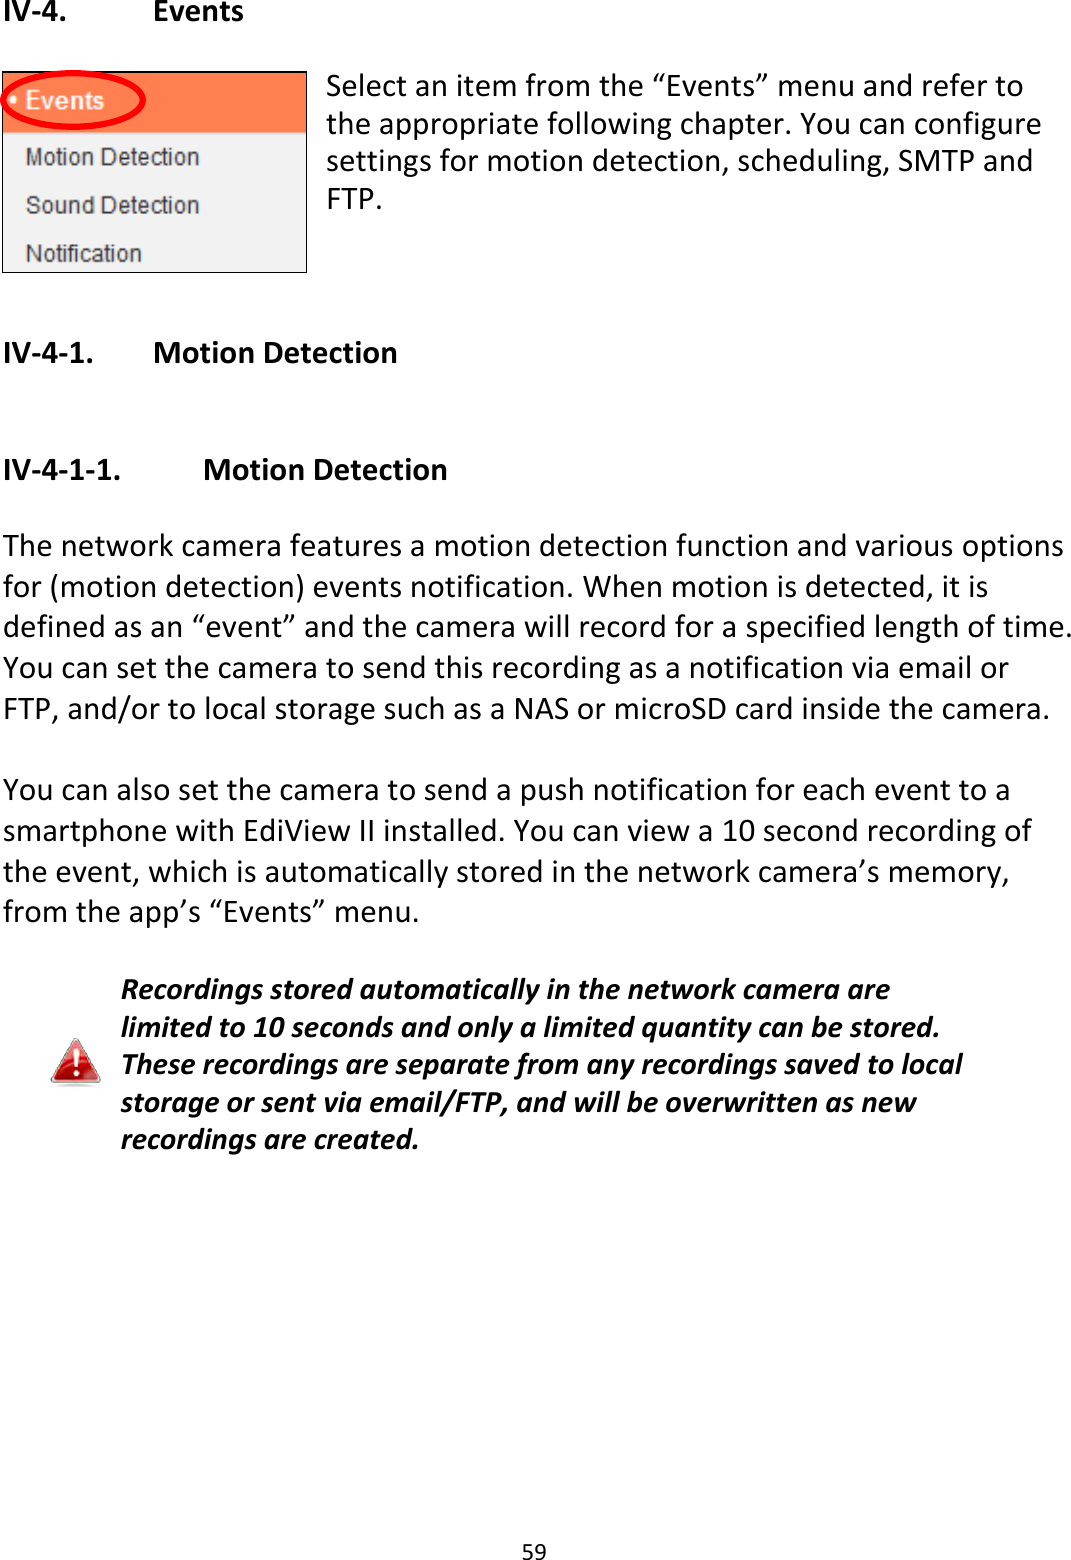 59  IV-4.    Events  Select an item from the “Events” menu and refer to the appropriate following chapter. You can configure settings for motion detection, scheduling, SMTP and FTP.   IV-4-1.   Motion Detection  IV-4-1-1.    Motion Detection  The network camera features a motion detection function and various options for (motion detection) events notification. When motion is detected, it is defined as an “event” and the camera will record for a specified length of time. You can set the camera to send this recording as a notification via email or FTP, and/or to local storage such as a NAS or microSD card inside the camera.    You can also set the camera to send a push notification for each event to a smartphone with EdiView II installed. You can view a 10 second recording of the event, which is automatically stored in the network camera’s memory, from the app’s “Events” menu.  Recordings stored automatically in the network camera are limited to 10 seconds and only a limited quantity can be stored. These recordings are separate from any recordings saved to local storage or sent via email/FTP, and will be overwritten as new recordings are created.  